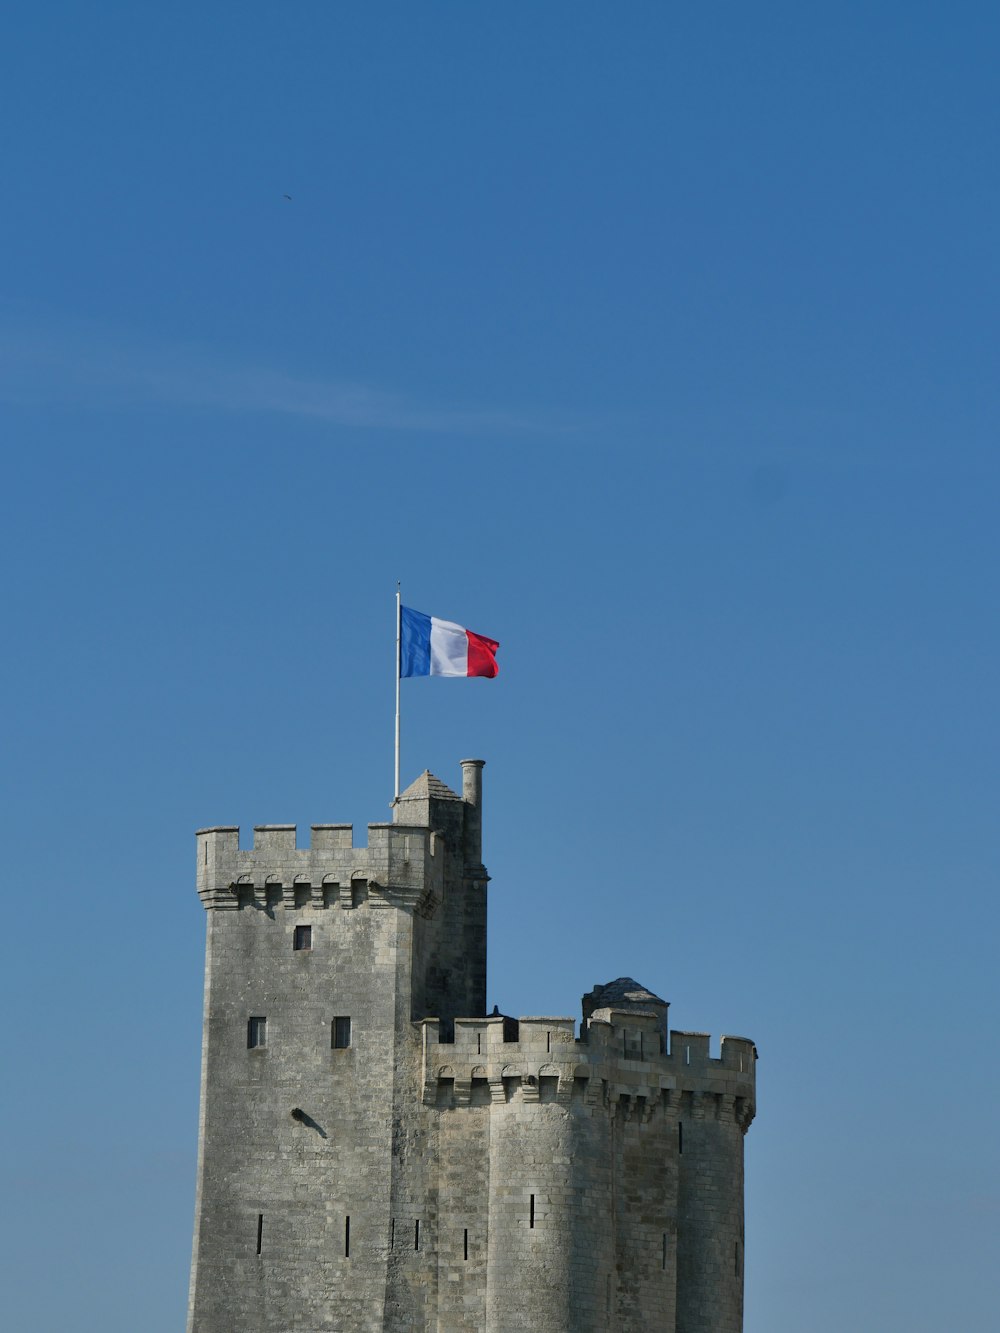 gray concrete castle with flag of us a on top under blue sky during daytime